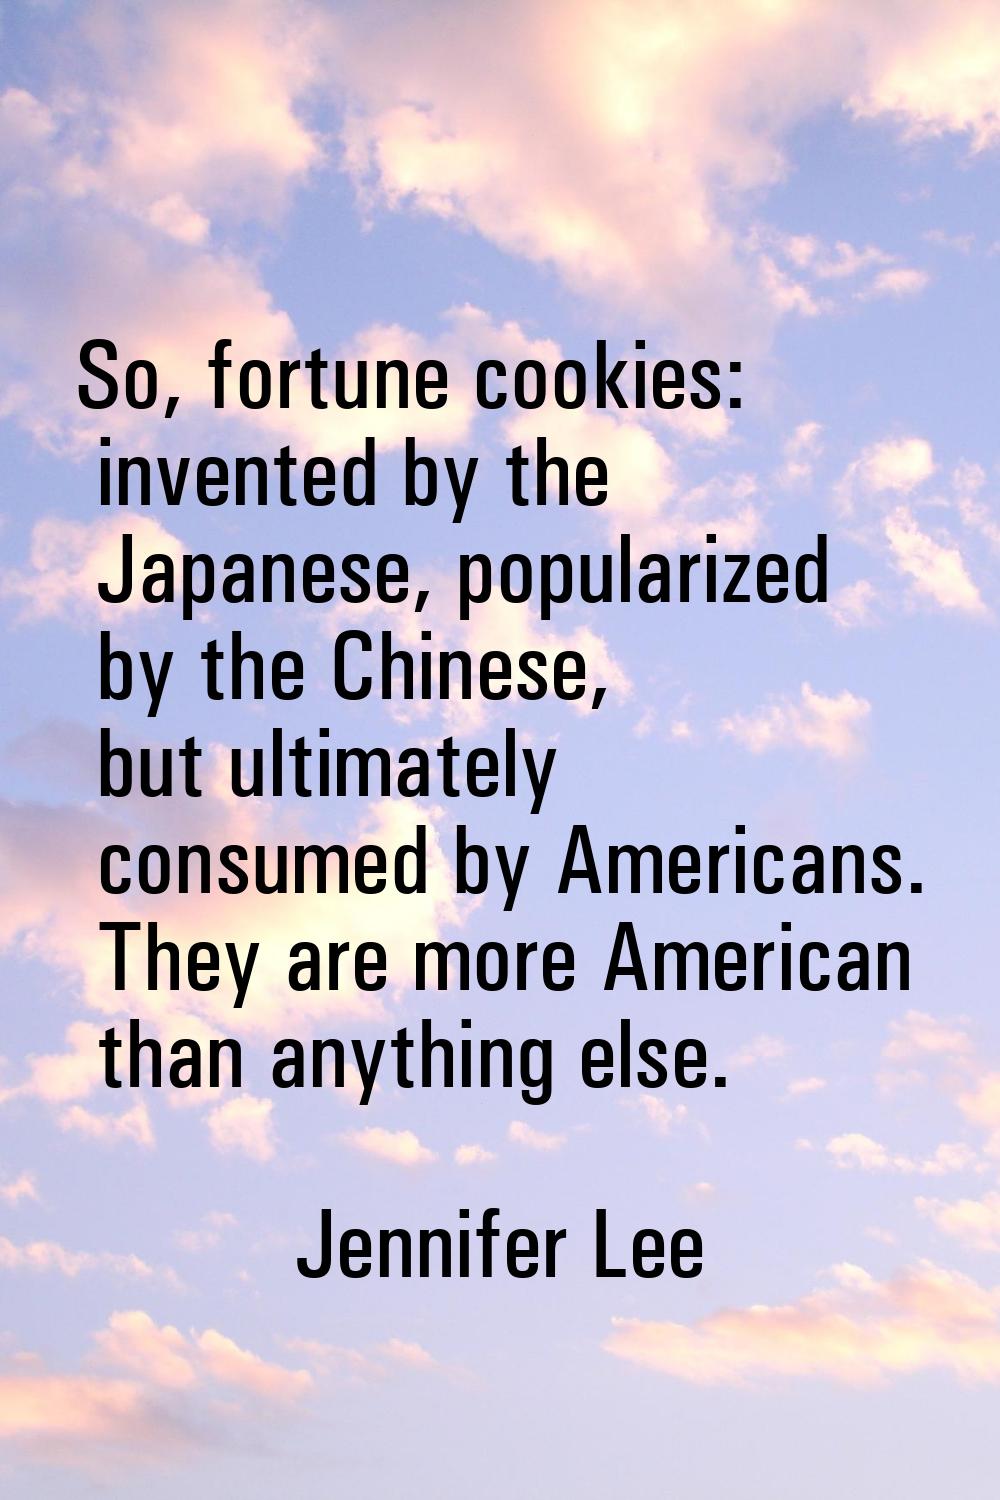 So, fortune cookies: invented by the Japanese, popularized by the Chinese, but ultimately consumed 